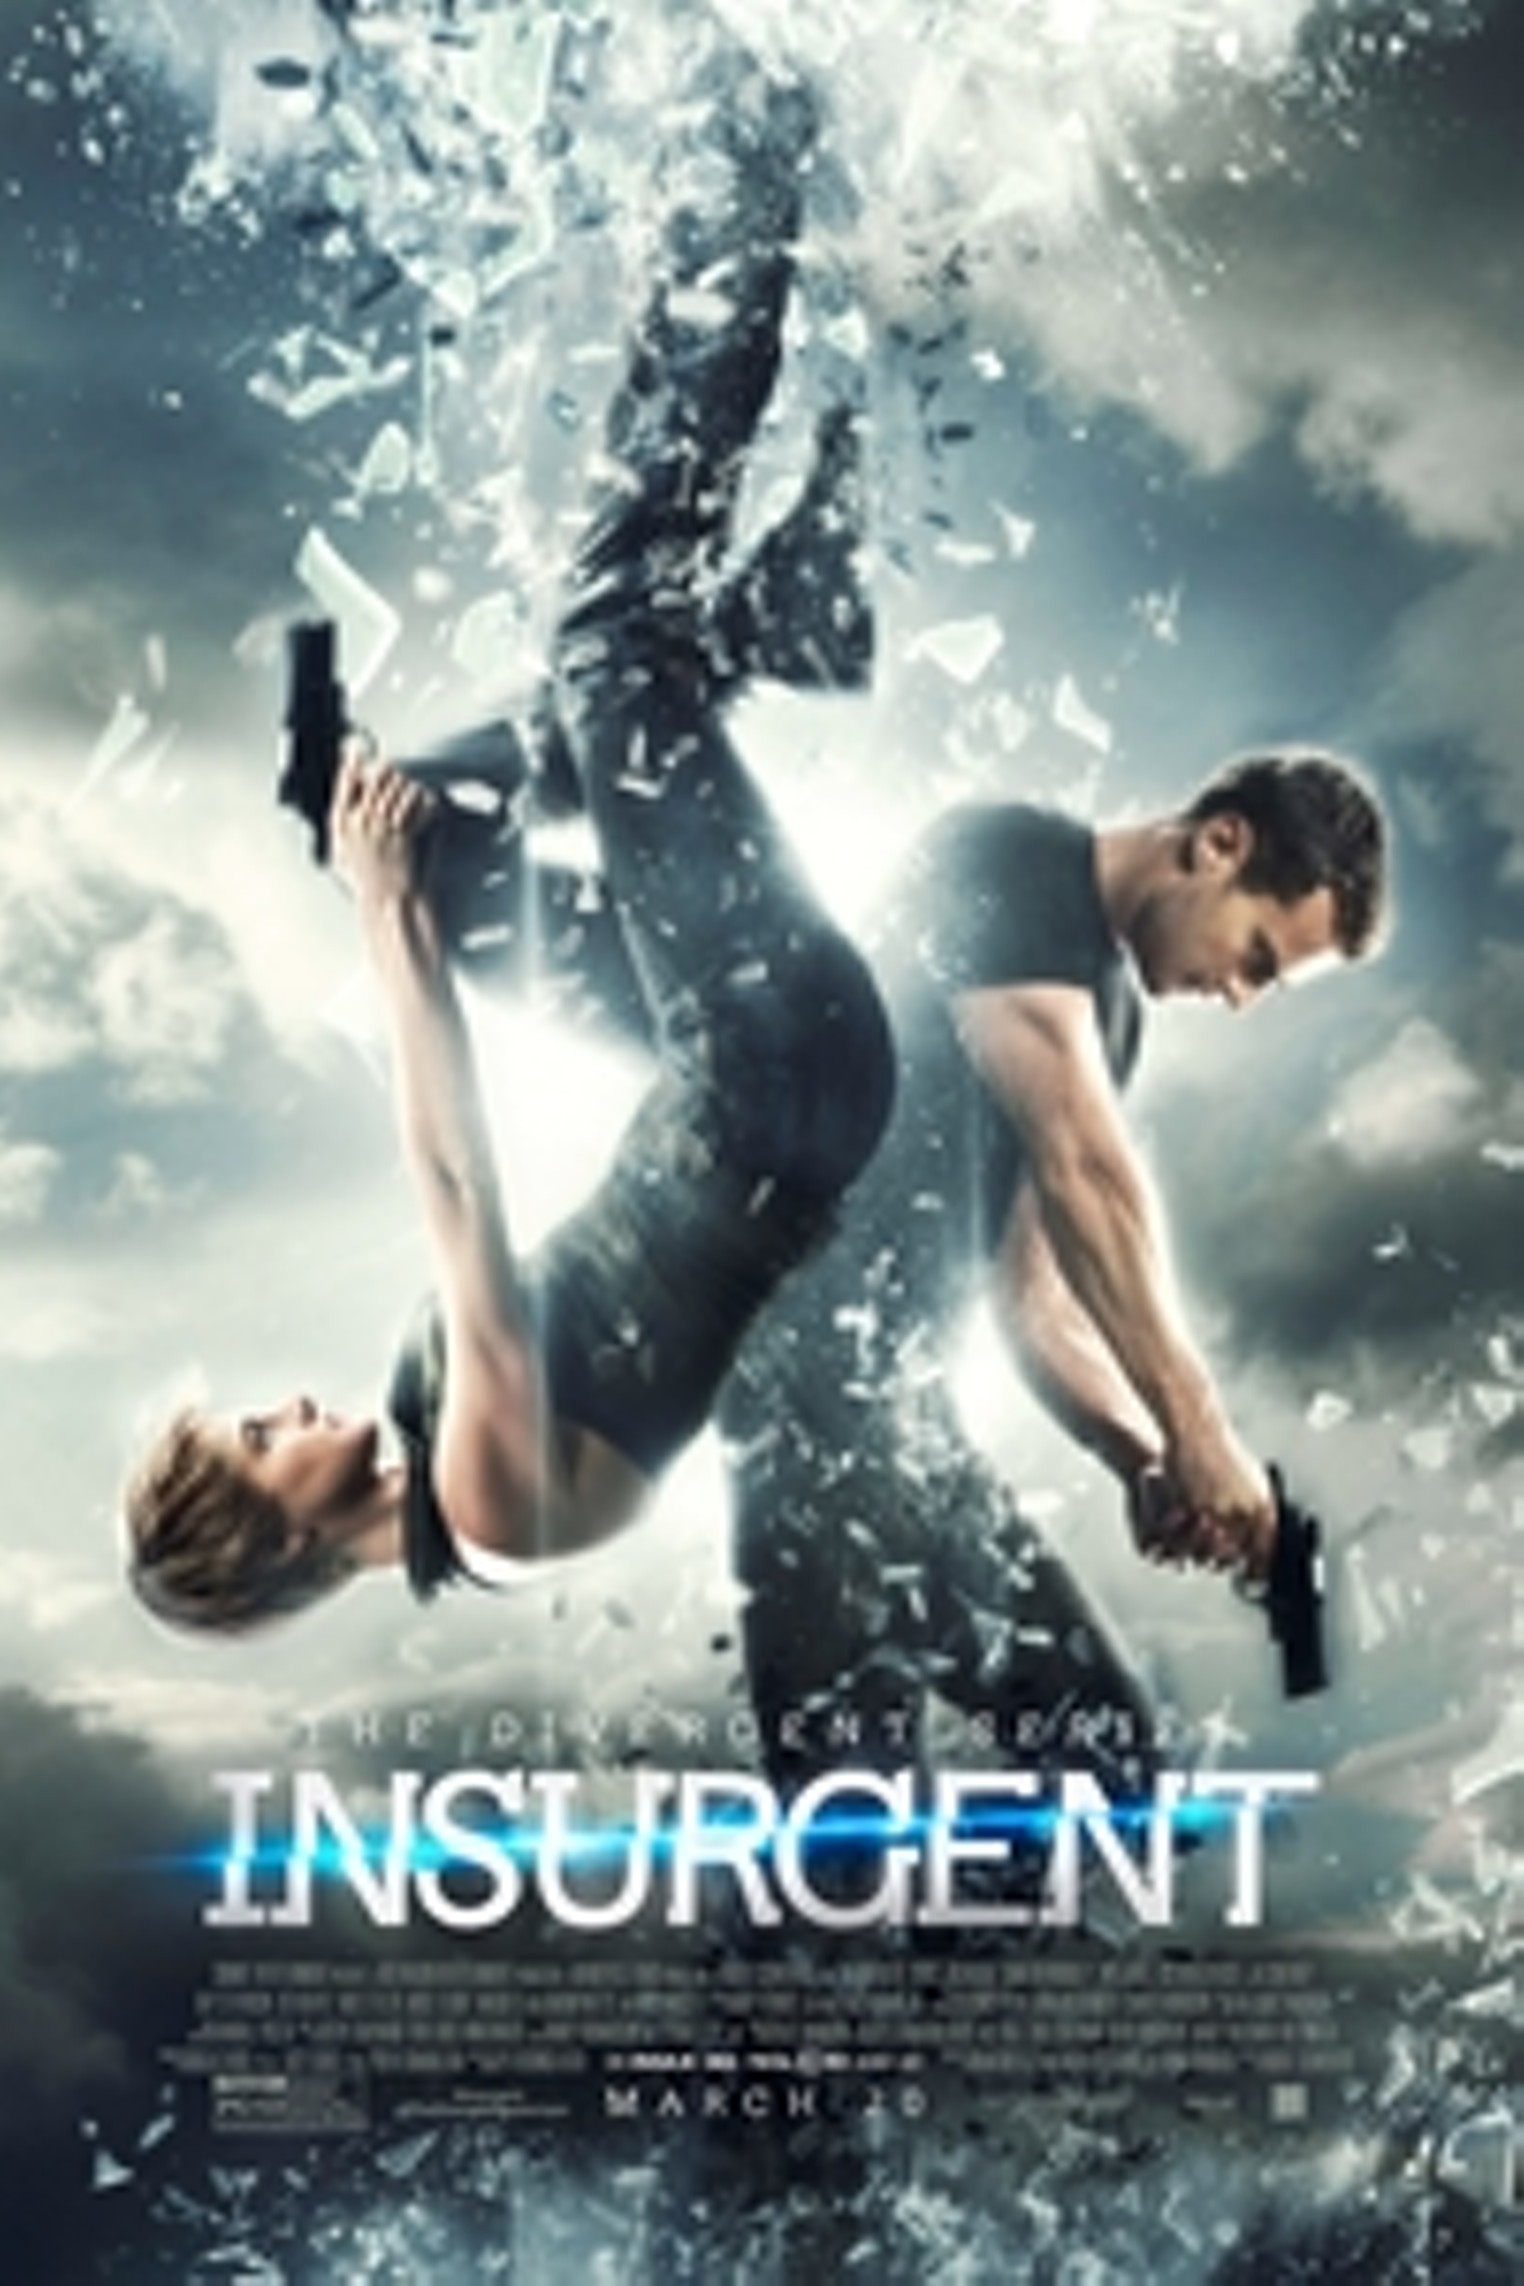 The Divergent Series: Insurgent | Phoenix New Times | The Leading Independent News Source in Phoenix,